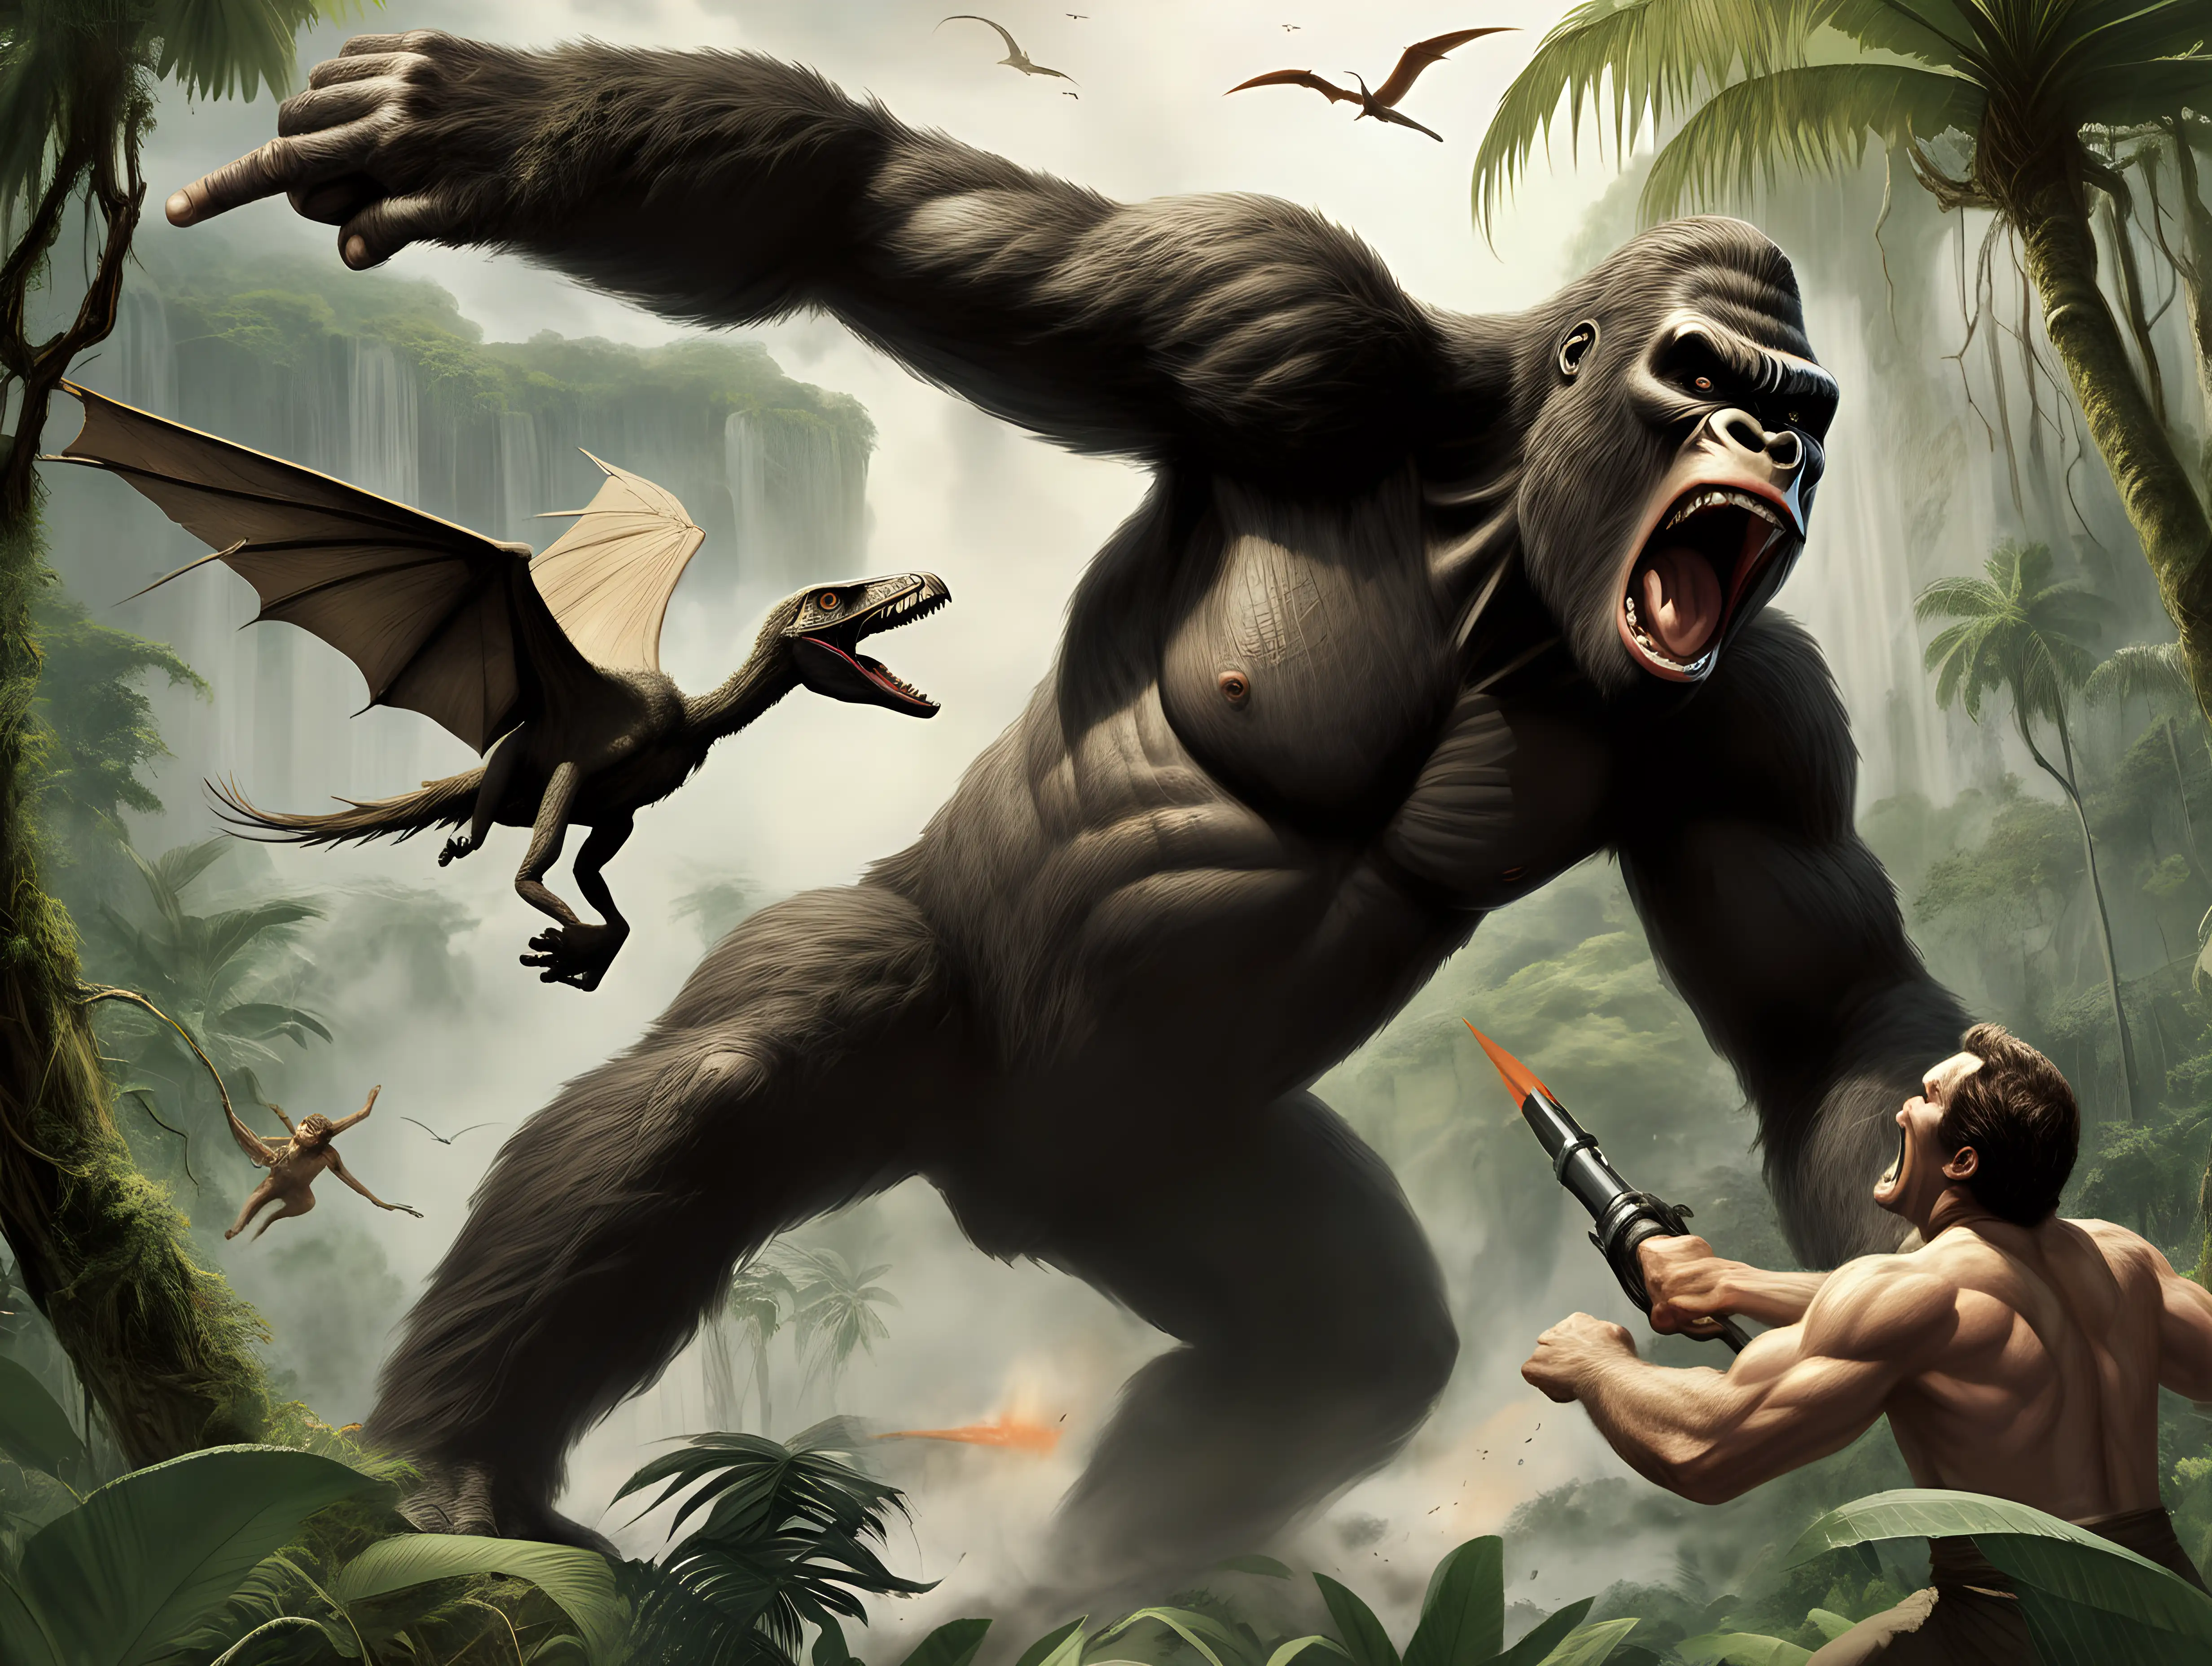 King Kong fights a pterodactyl in the jungle